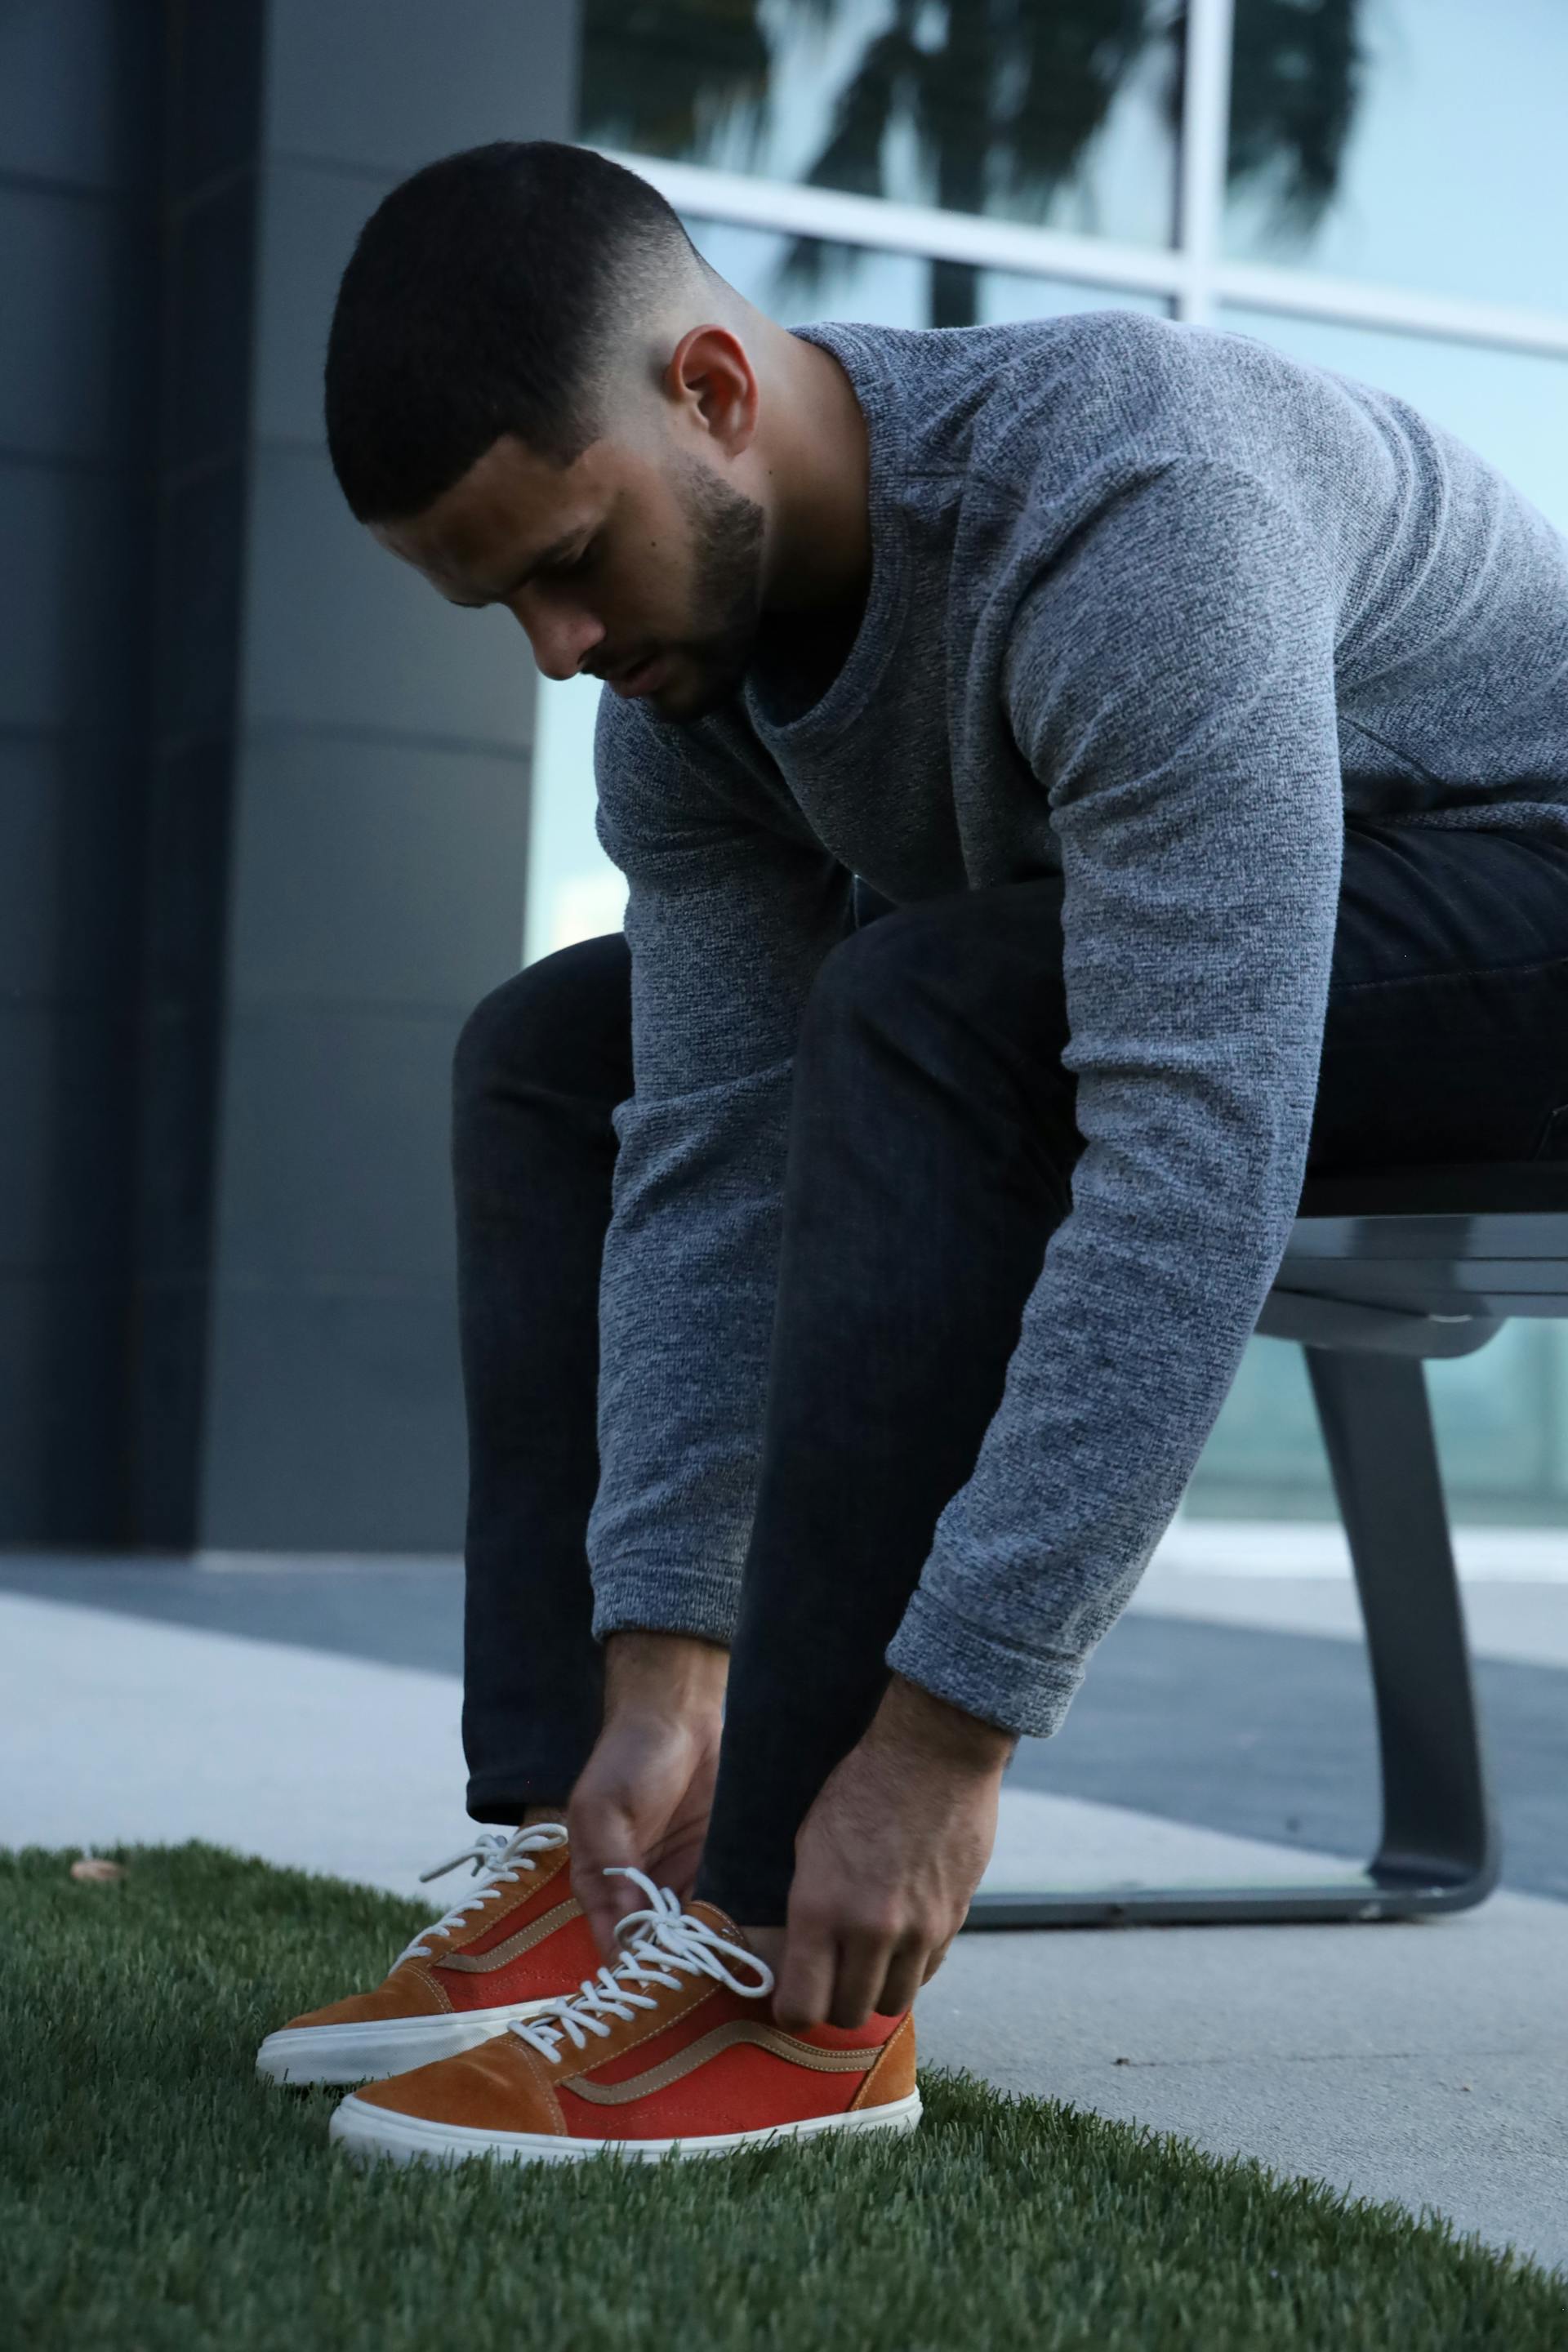 A man putting his shoes on | Source: Pexels